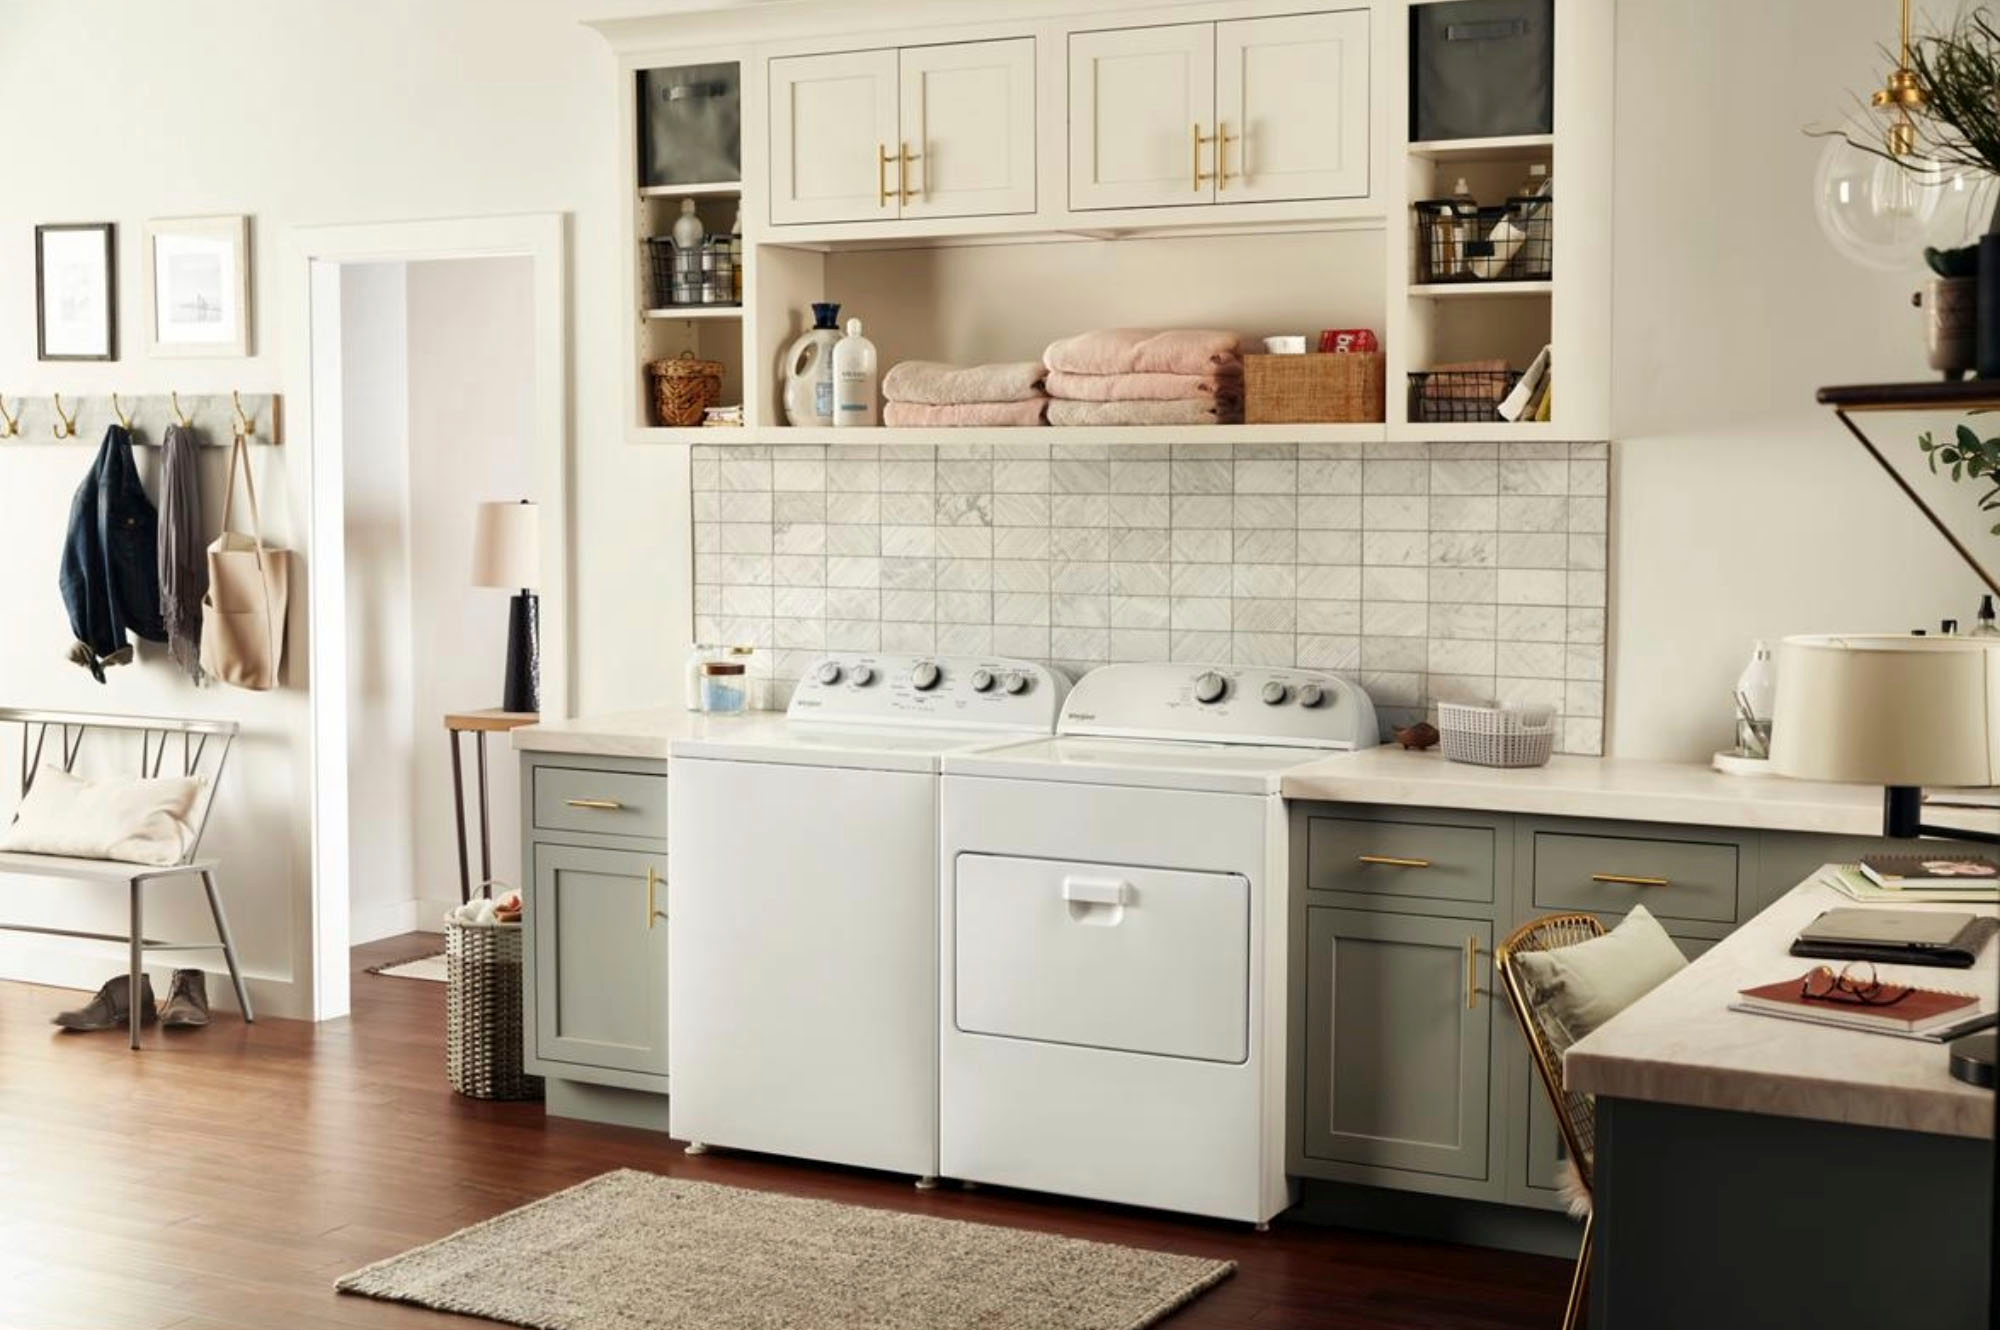 Whirlpool WHI-WGD4850HW 7.0 cu. ft. Top Load Gas Dryer with AutoDry™ Drying  System, Sheely's Furniture & Appliance